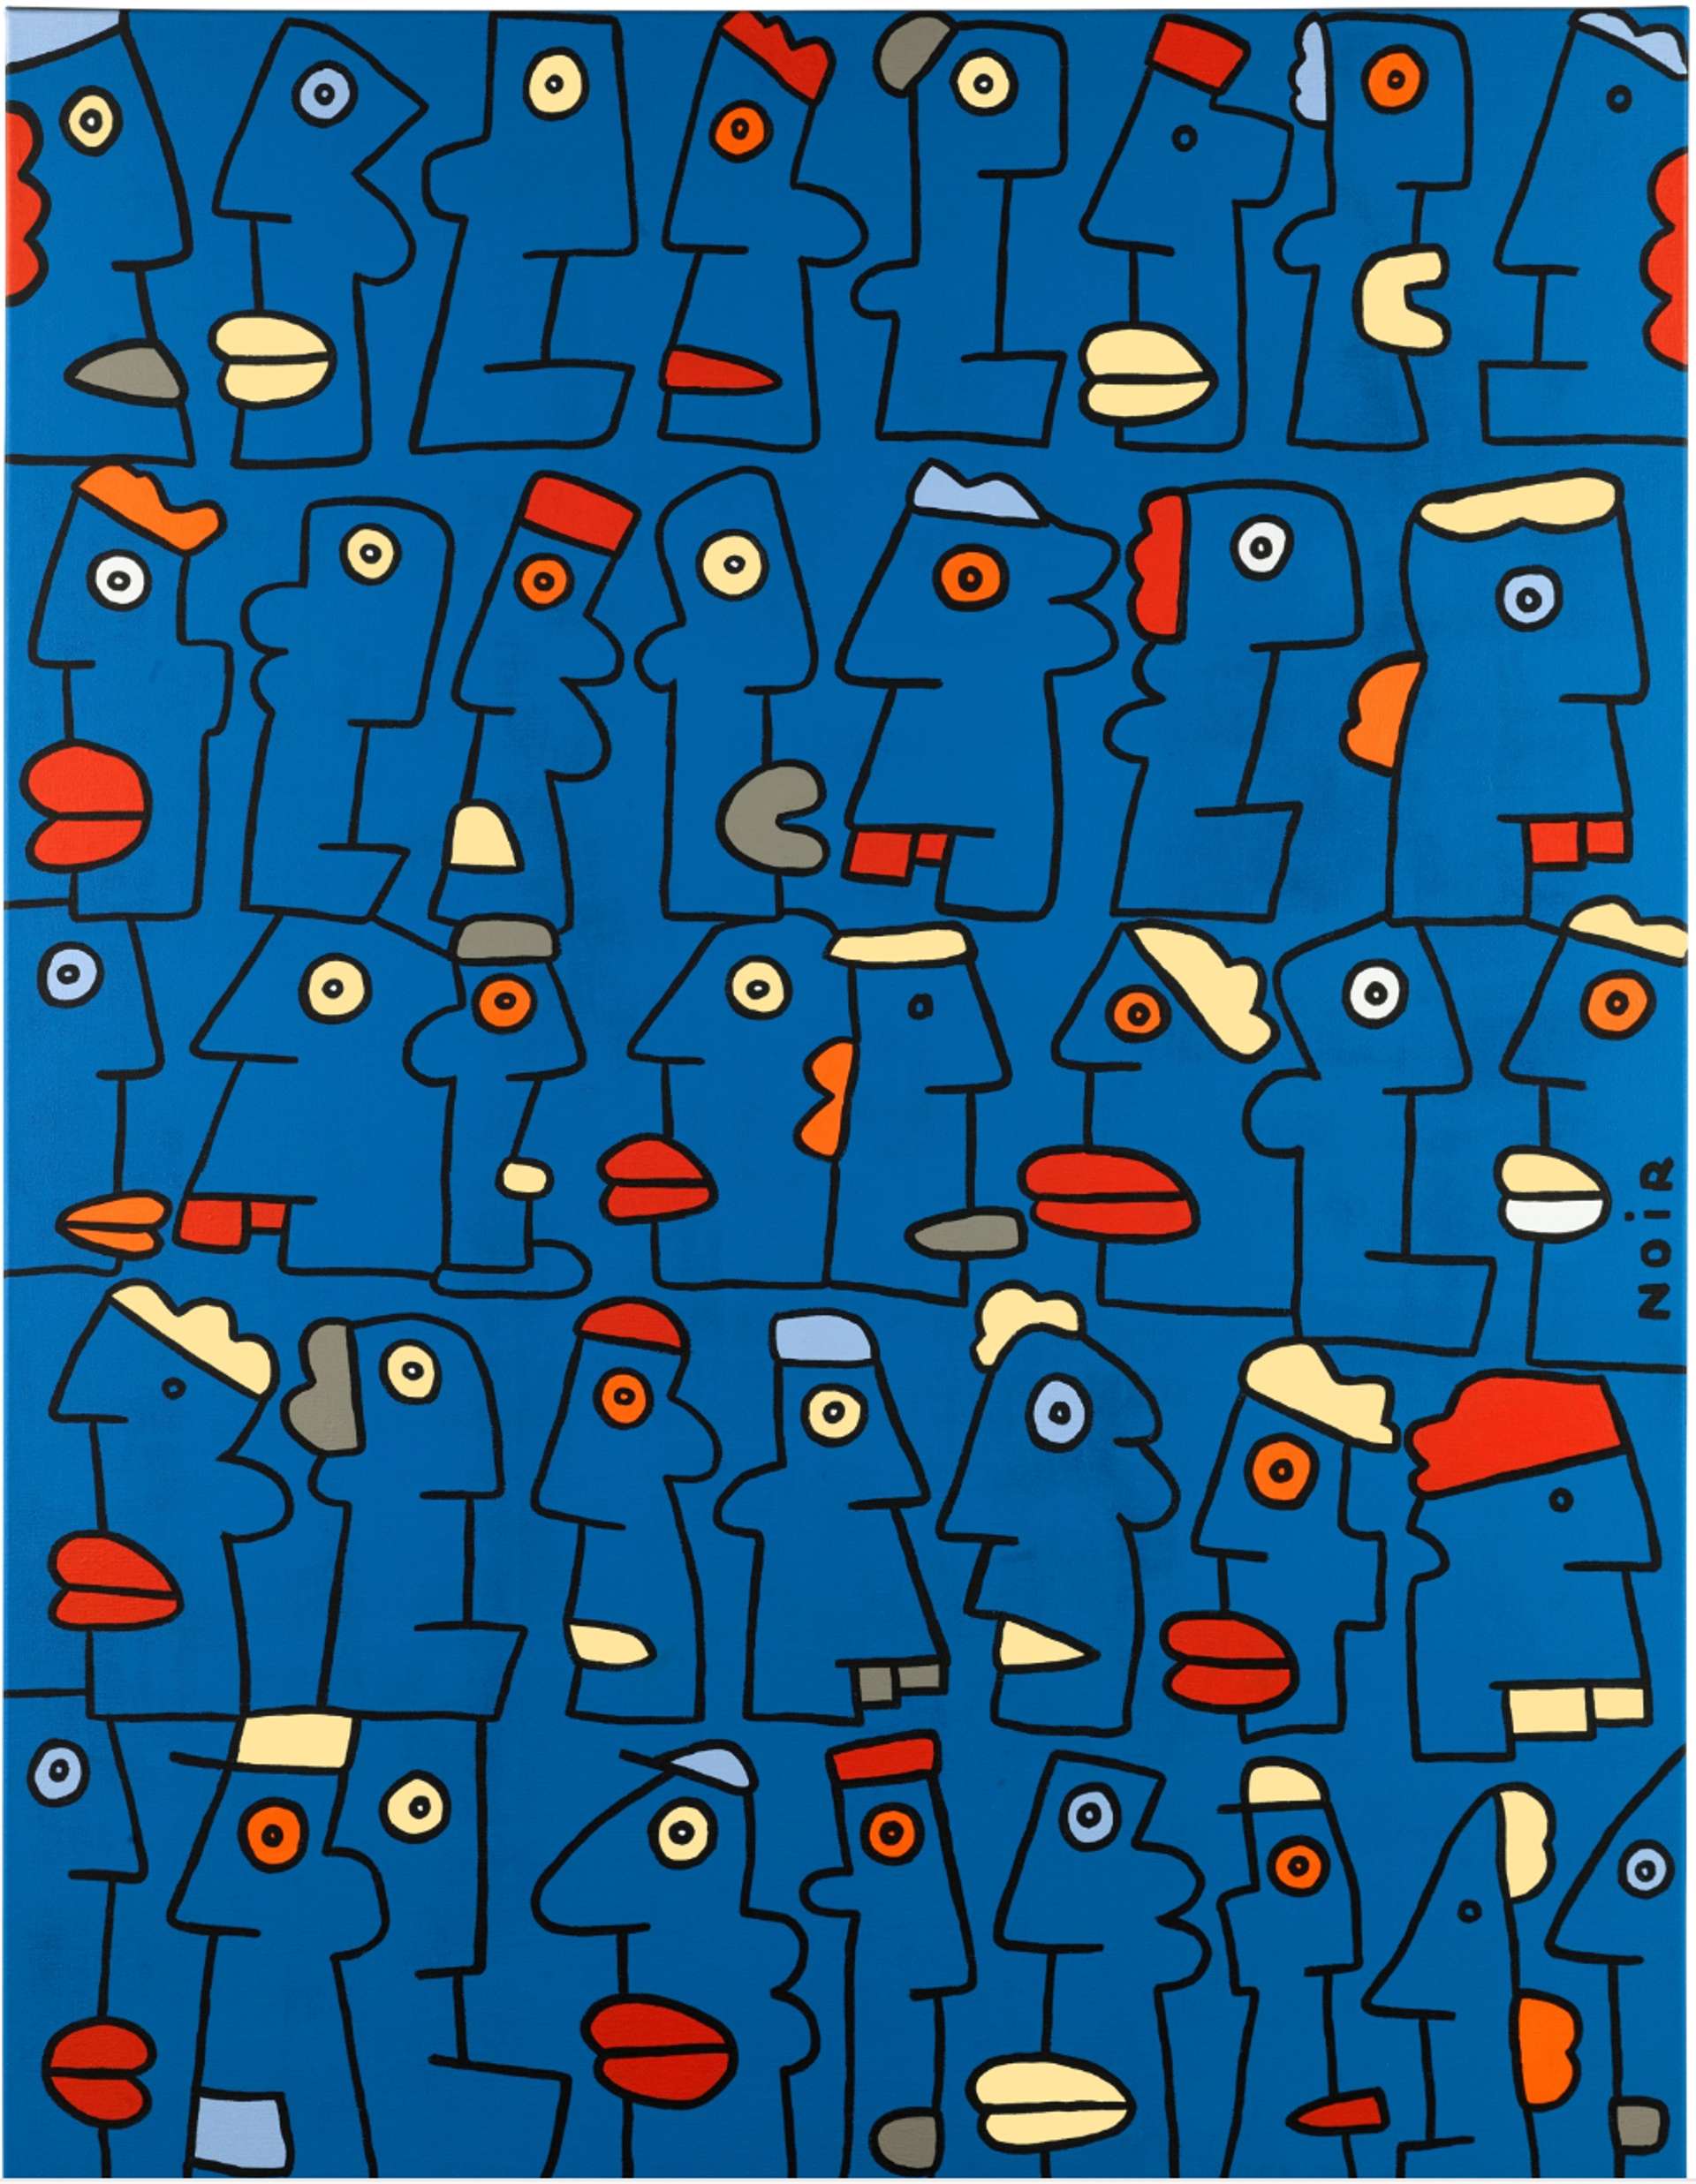 Abstract caricature faces in bold black lines arranged in a Tetris-like puzzle against a vibrant cerulean blue backdrop. The faces feature exaggerated lips in red, blue and white hair, and some with protruding teeth.